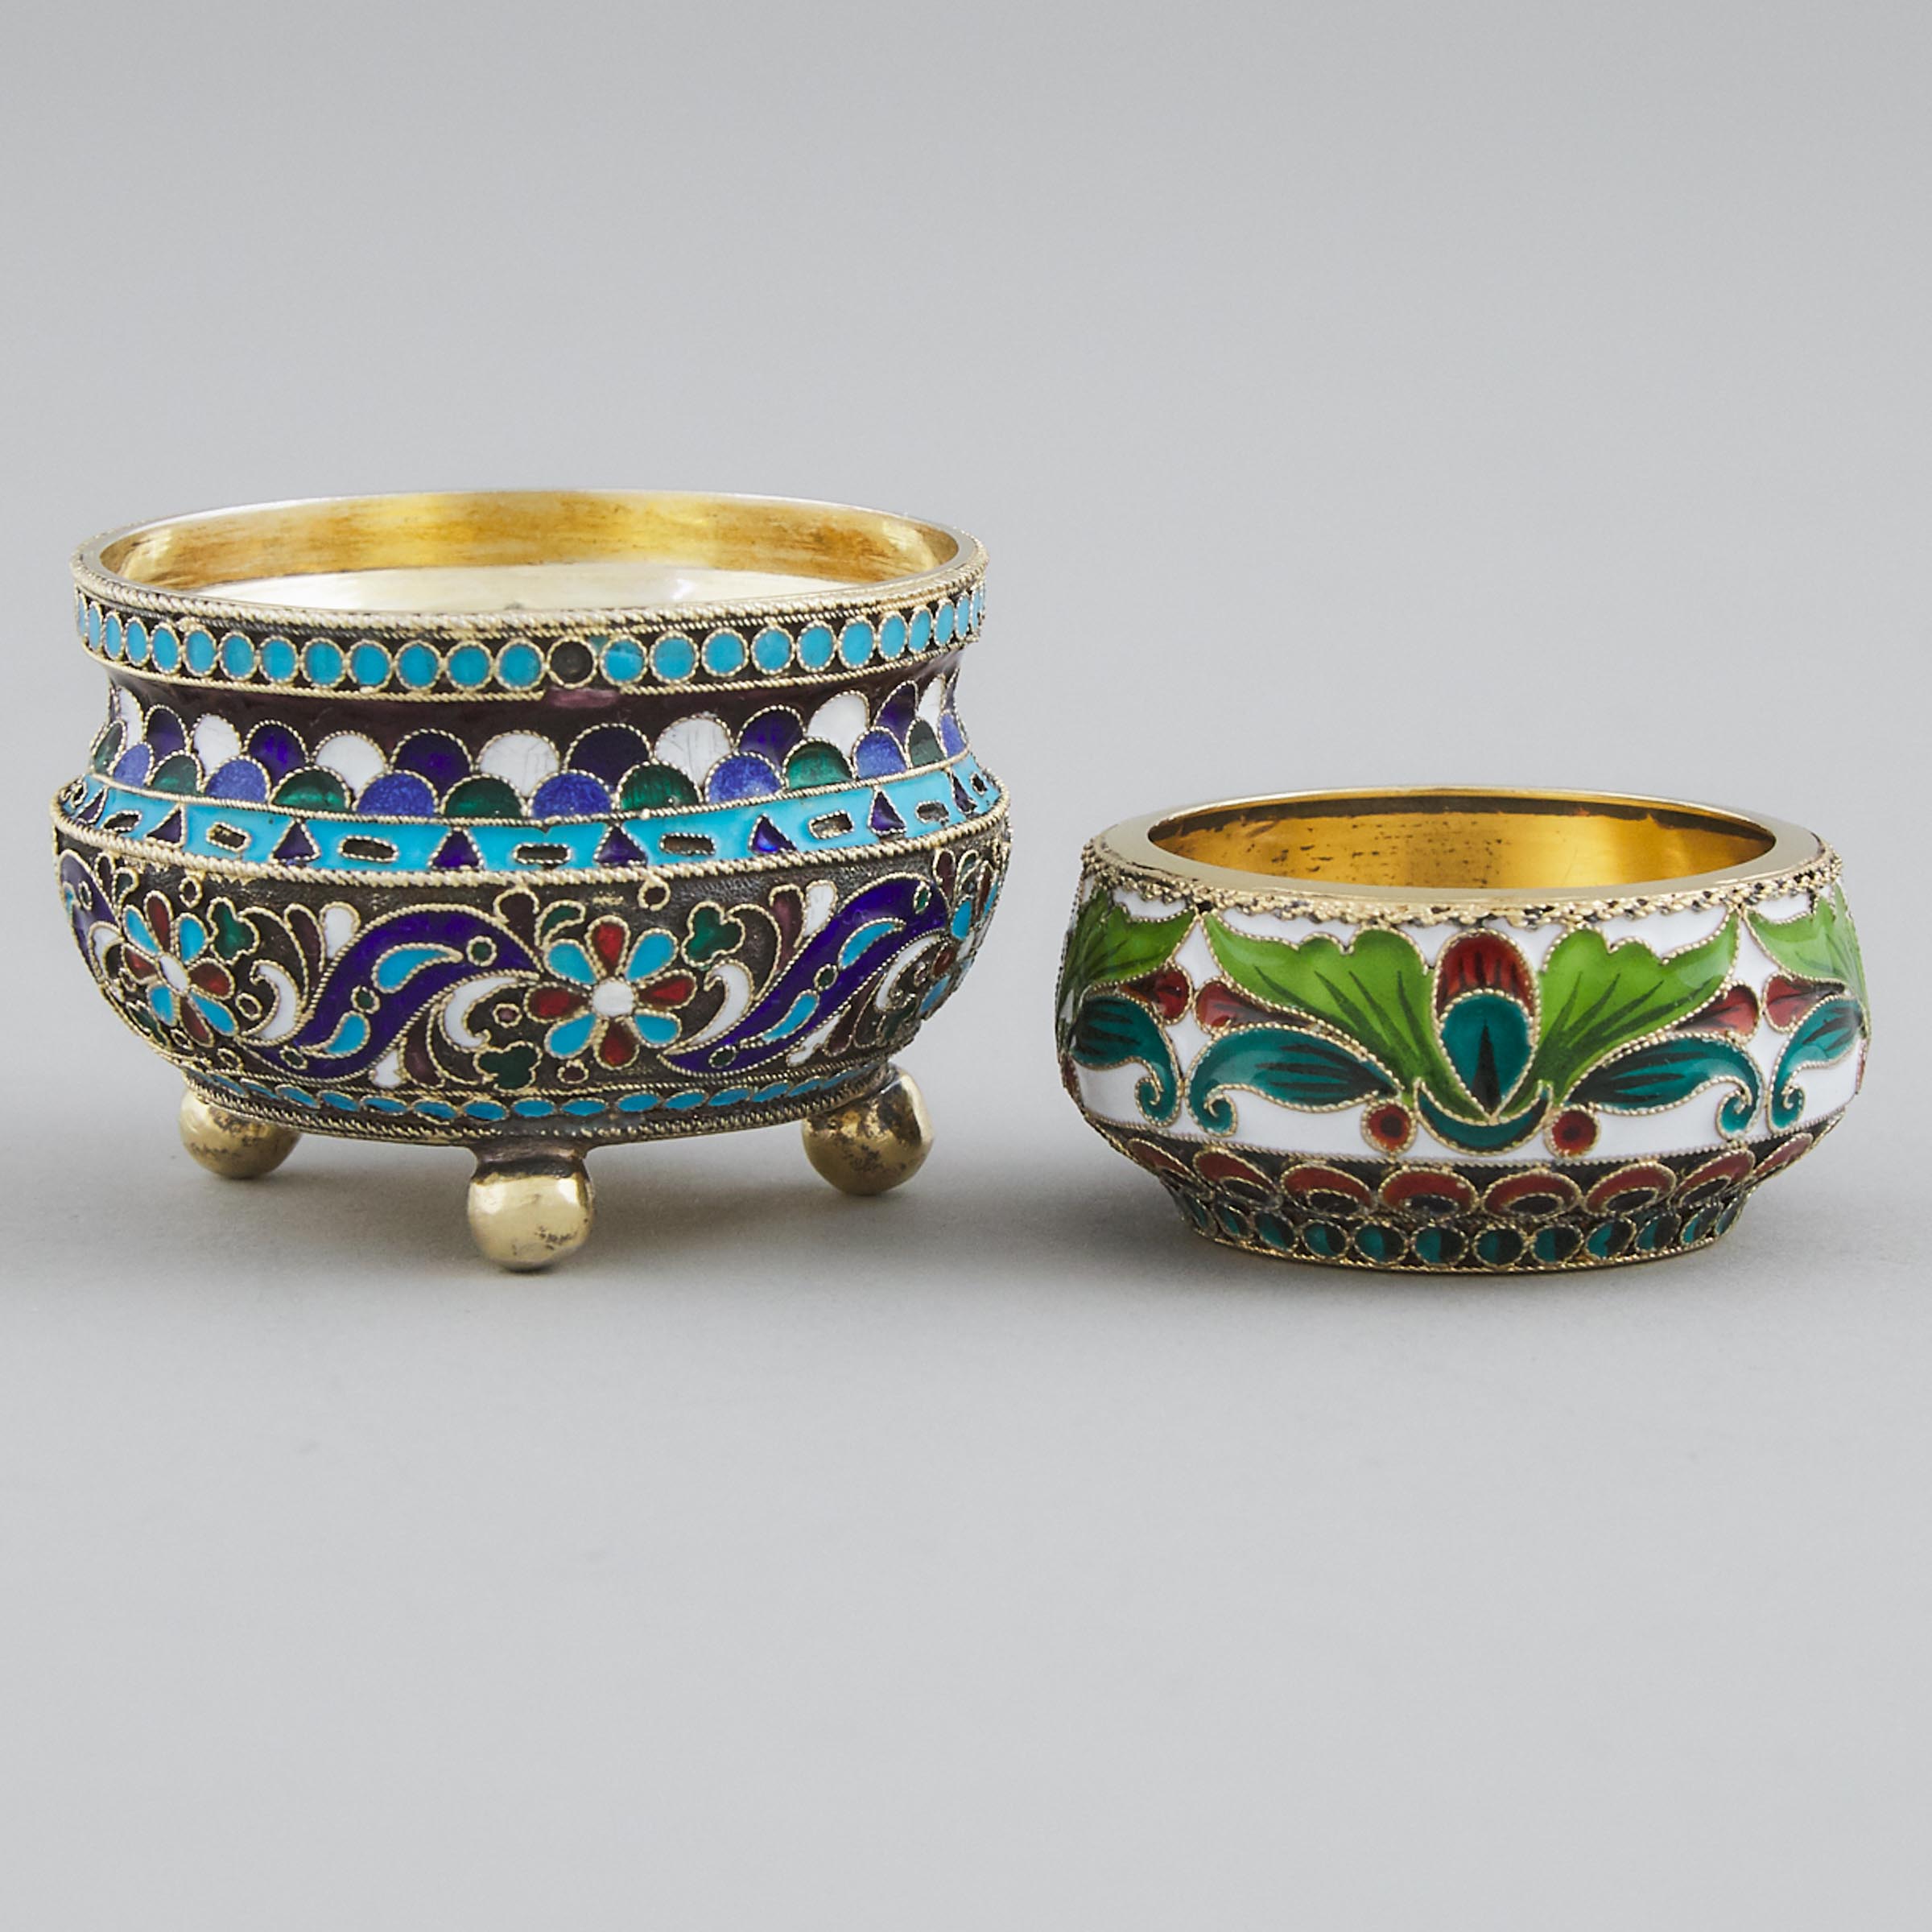 Two Russian Silver-Gilt and Cloisonné Enamel Salt Cellars, Moscow and St. Petersburg, early 20th century